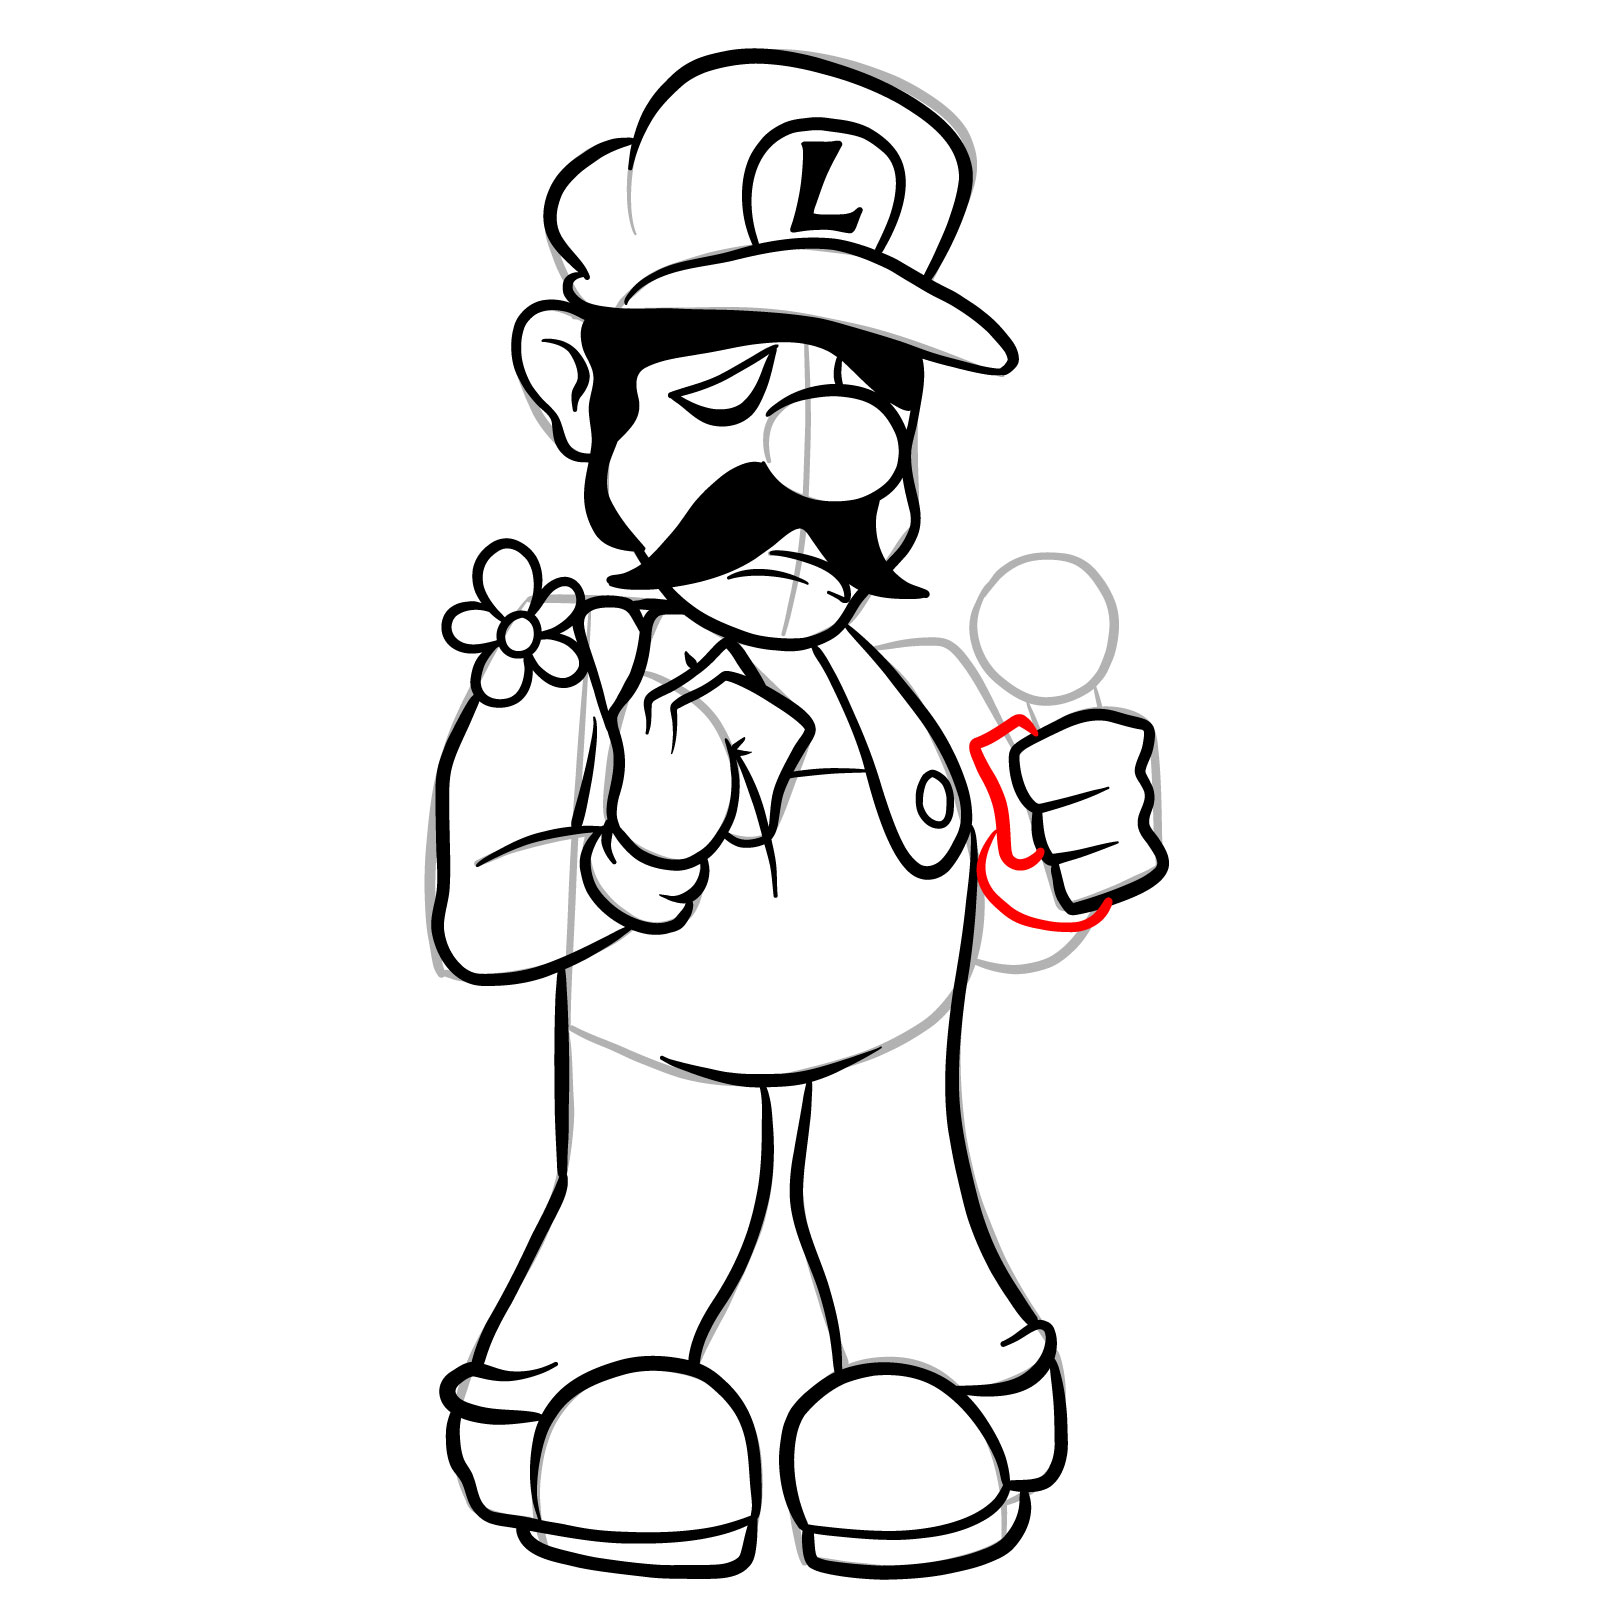 How to draw Beta Luigi from FNF - step 29